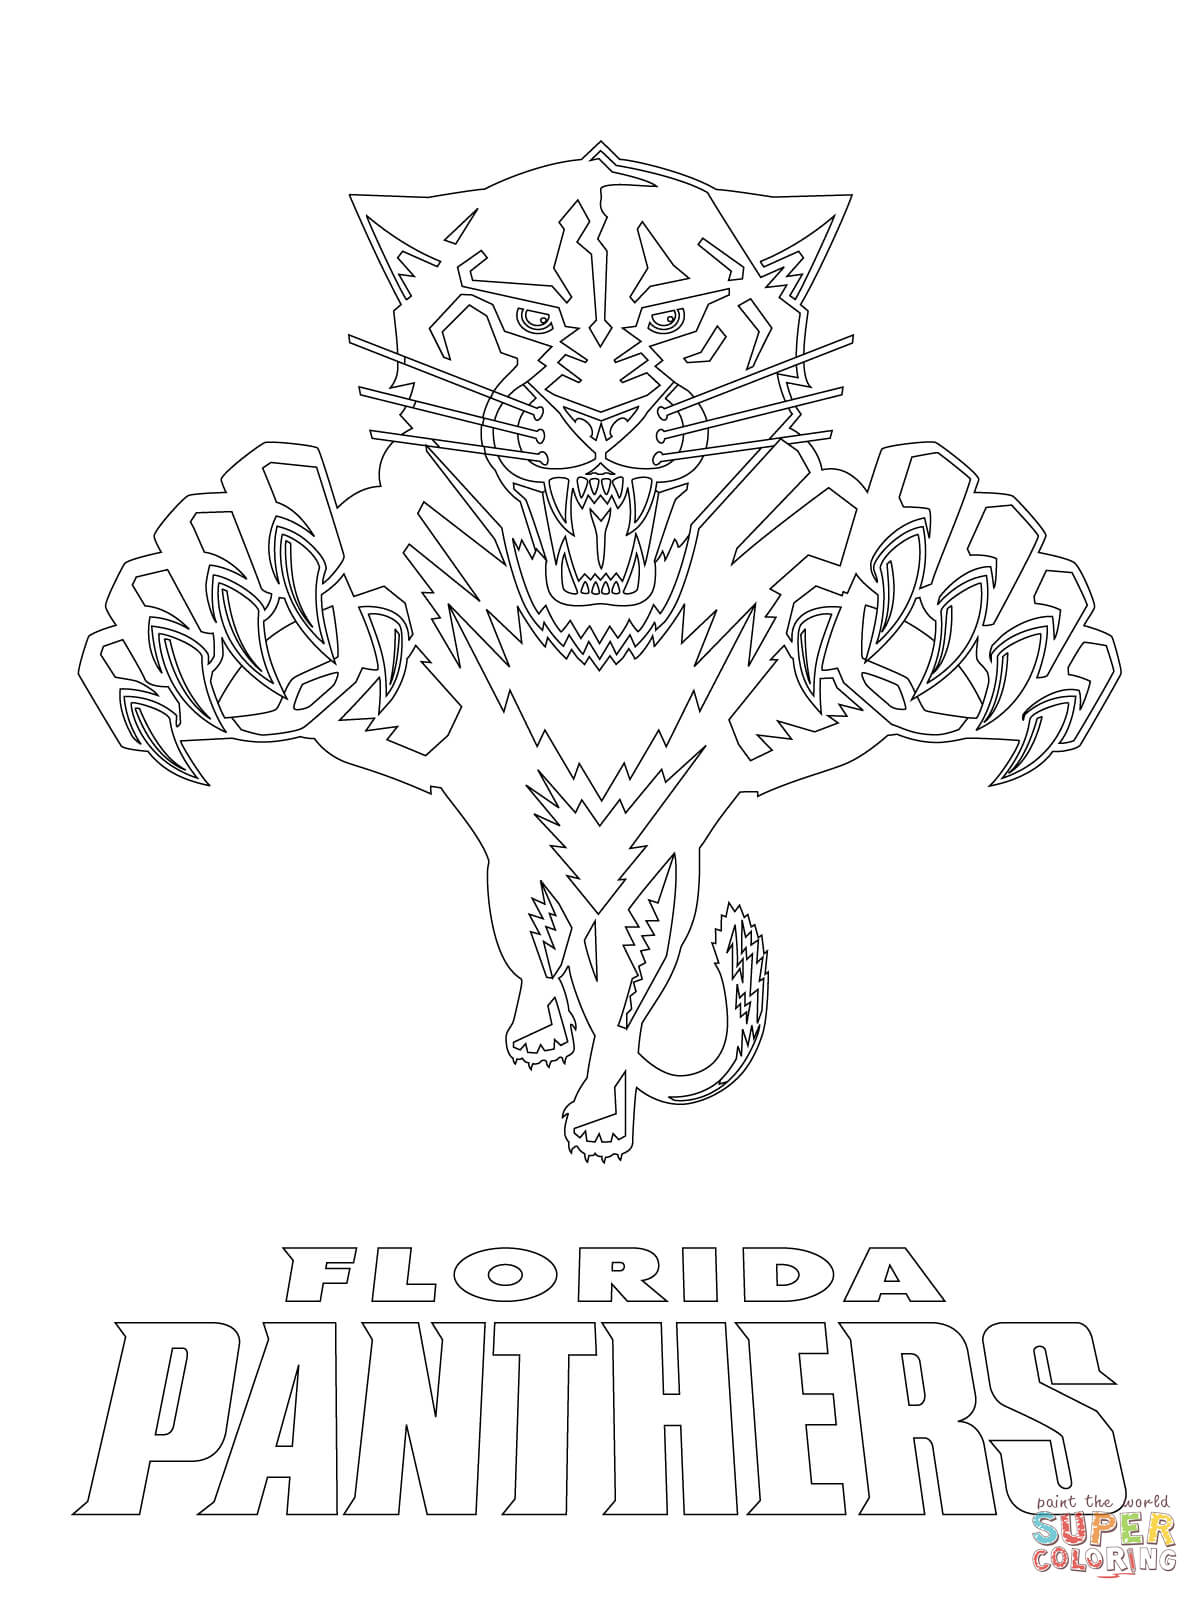 Florida Panthers Logo coloring page | Free Printable Coloring Pages